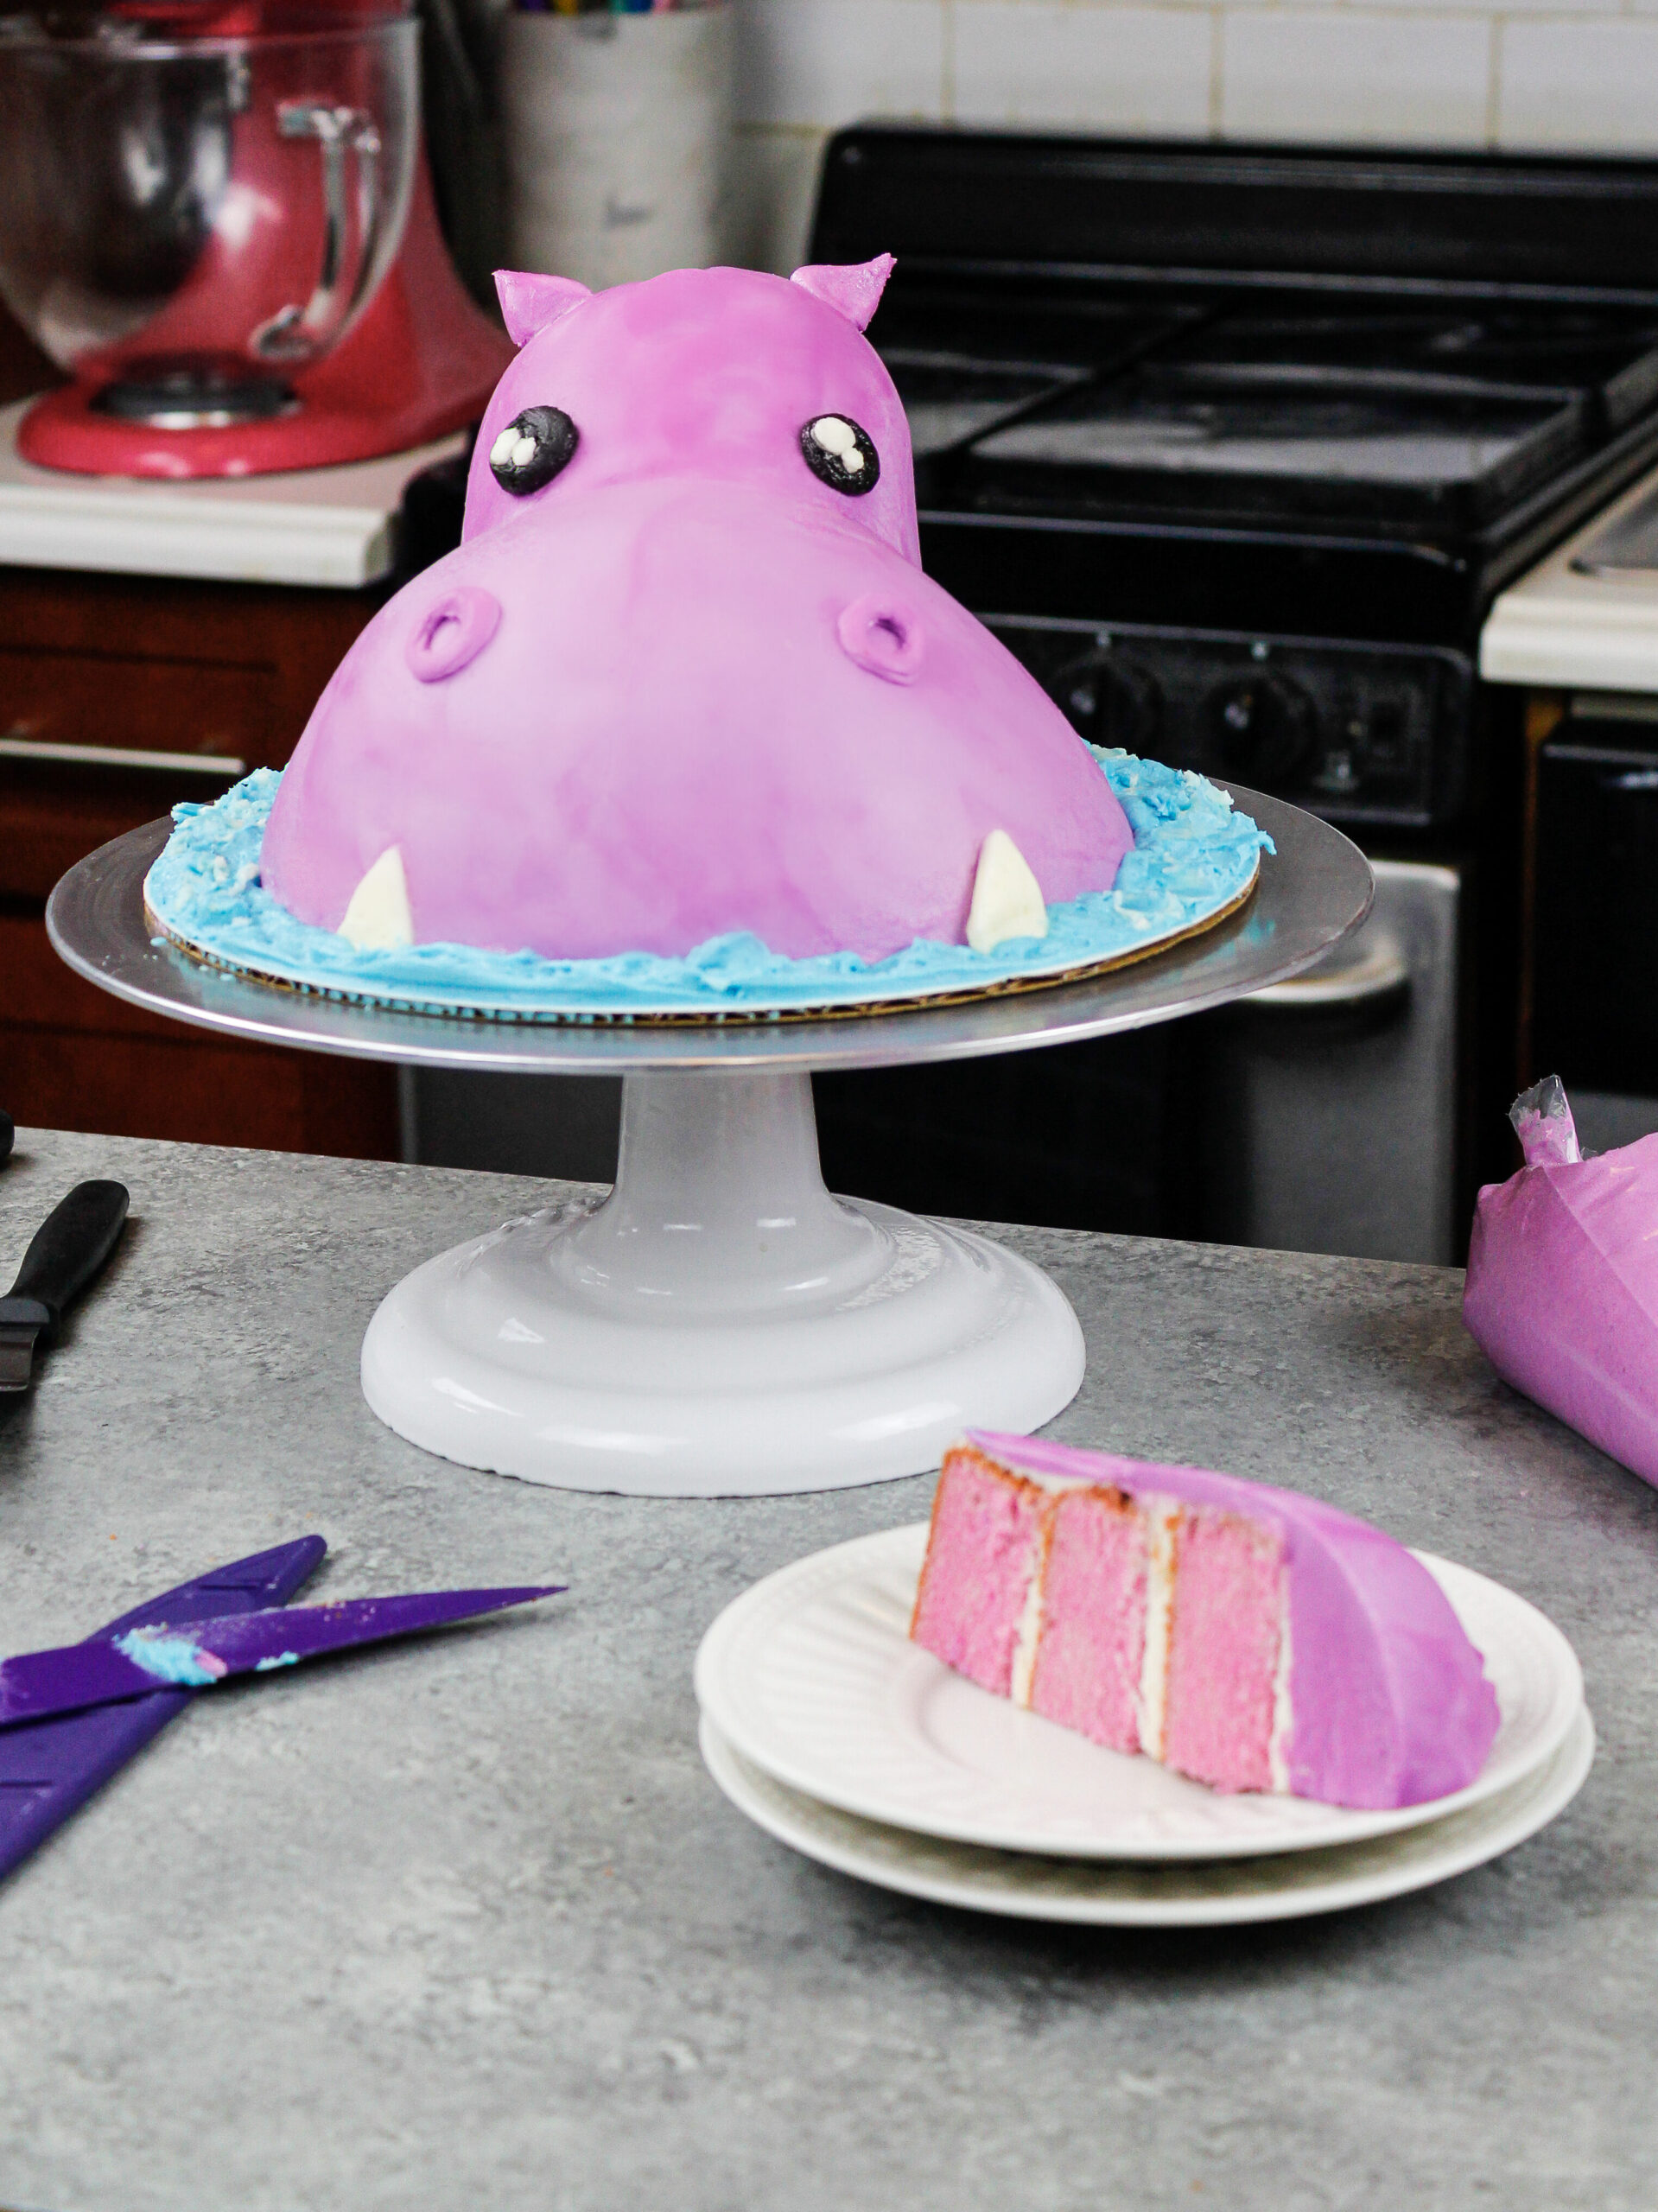 image of an easy buttercream hippo cake made for a child's birthday party with a slice cut out to show its matching purple cake layers